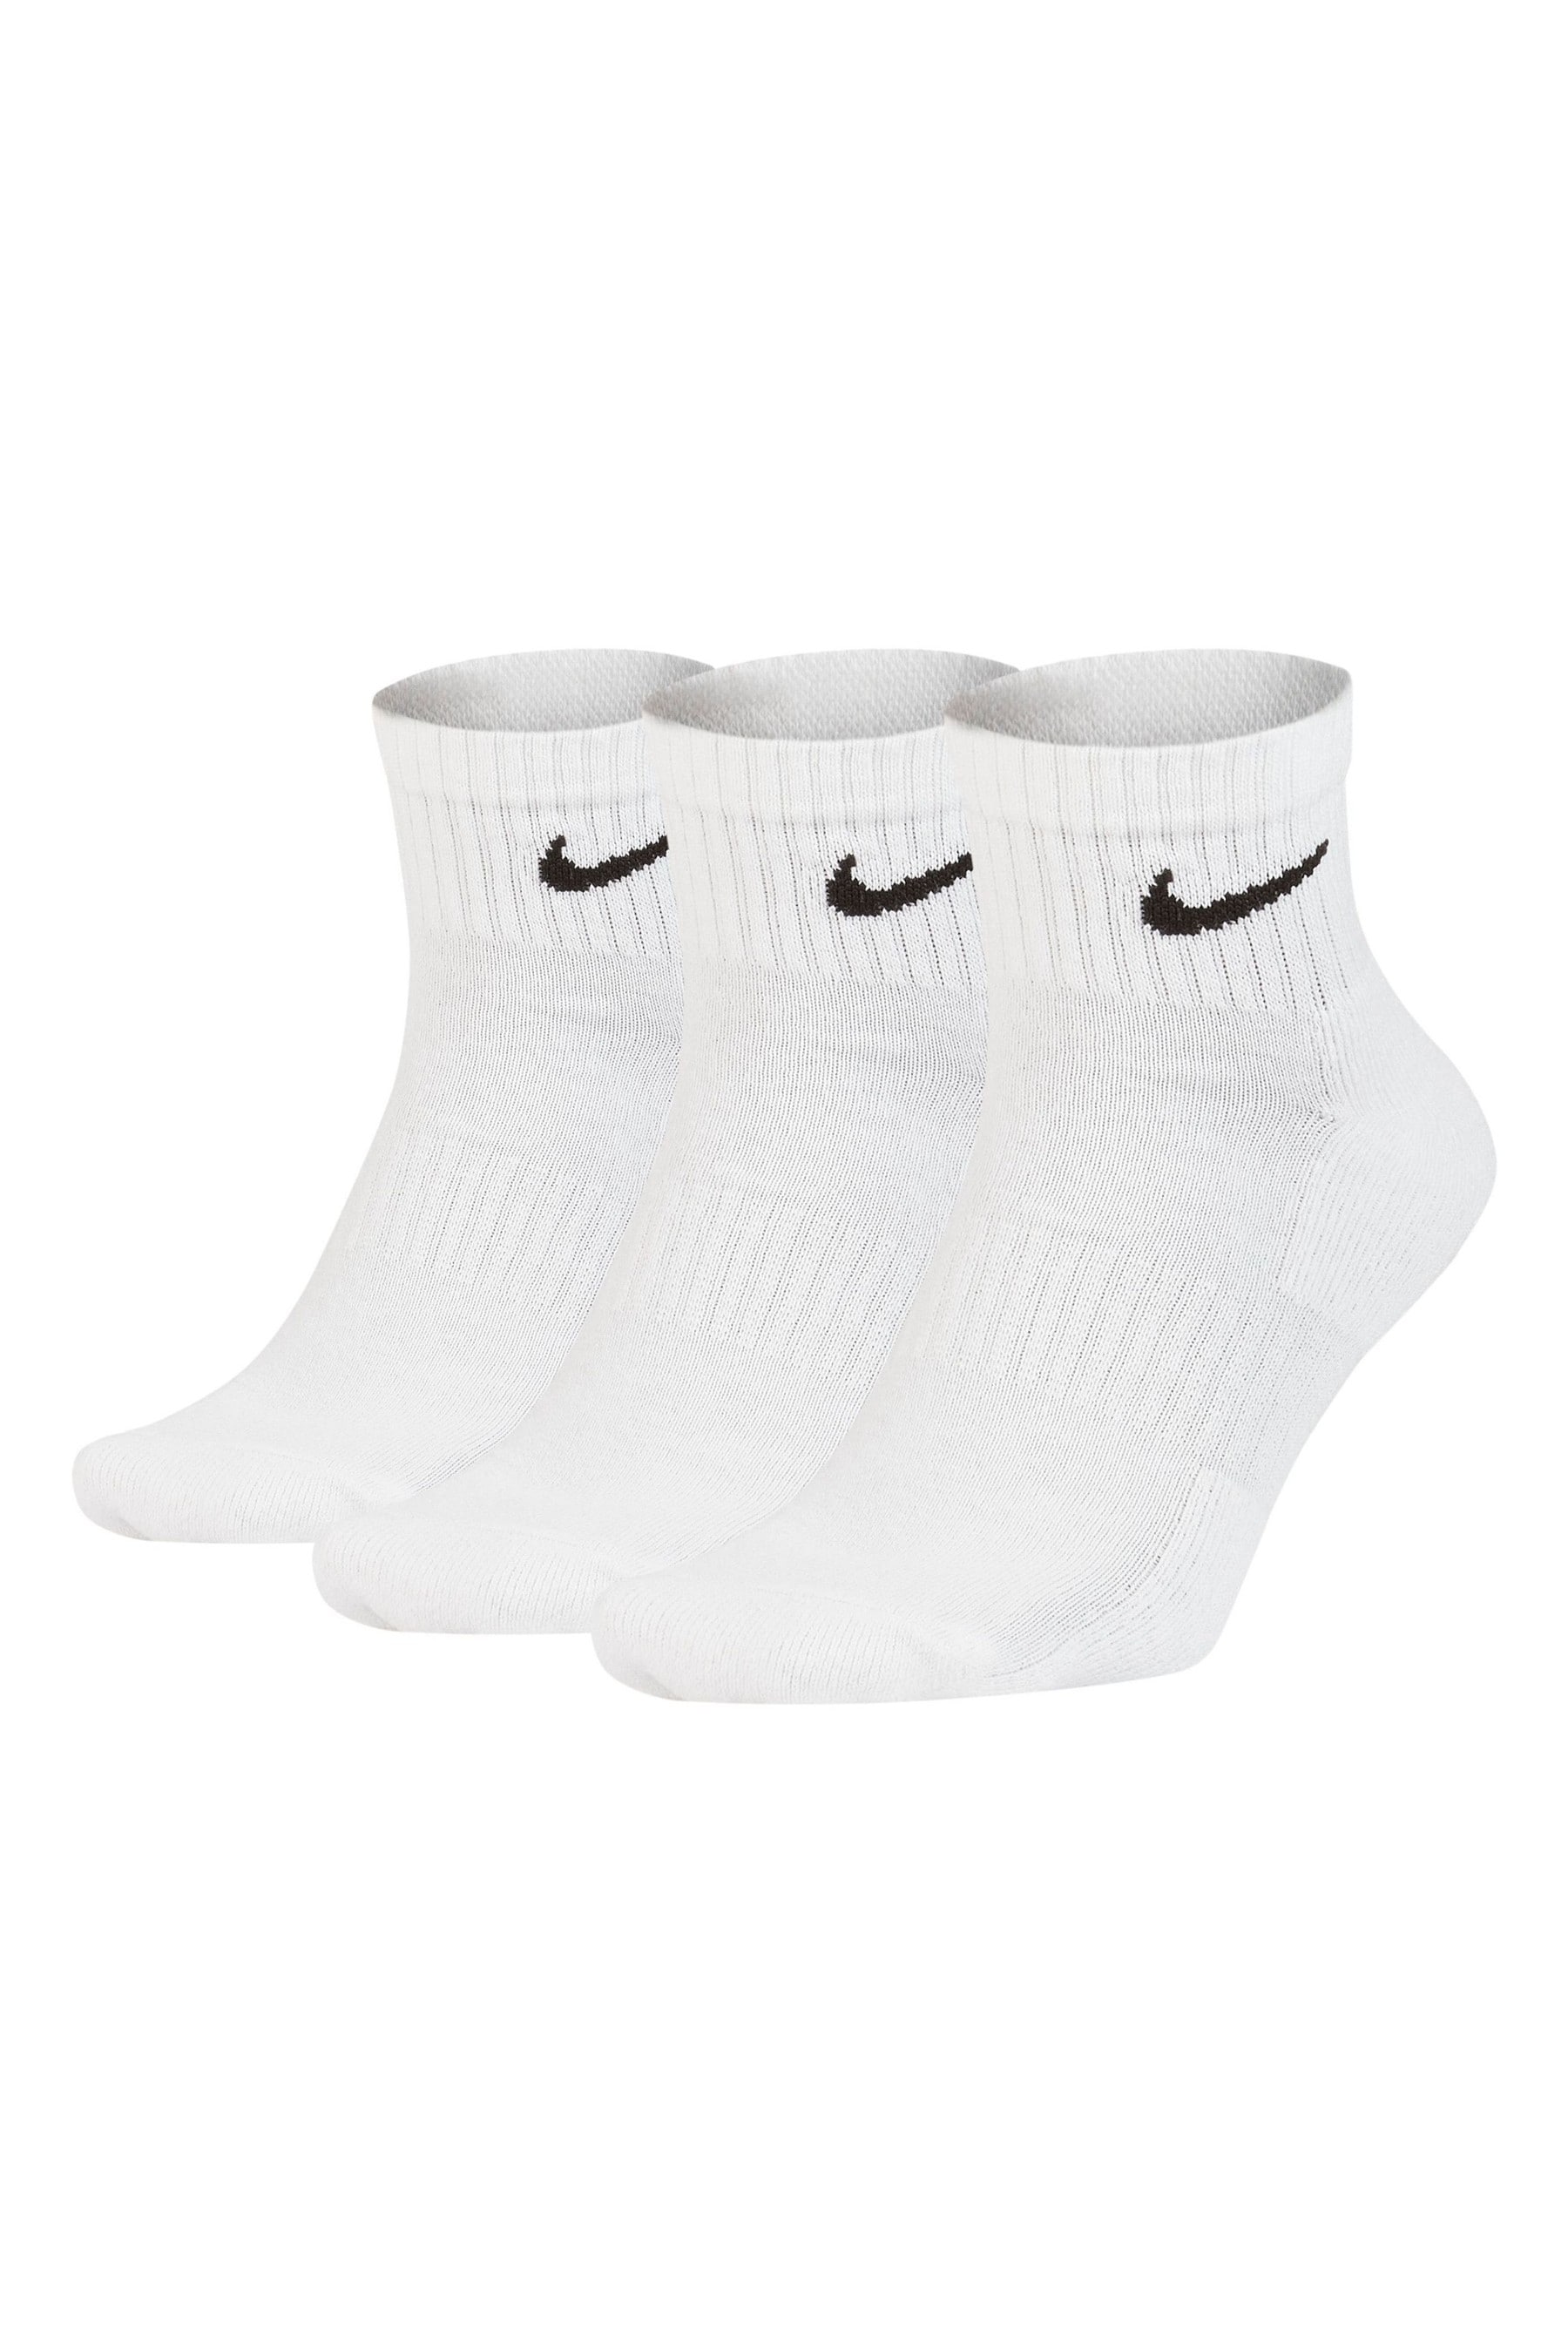 Buy Nike White Everyday Cushioned Ankle Socks 3 Pack from the Next UK ...